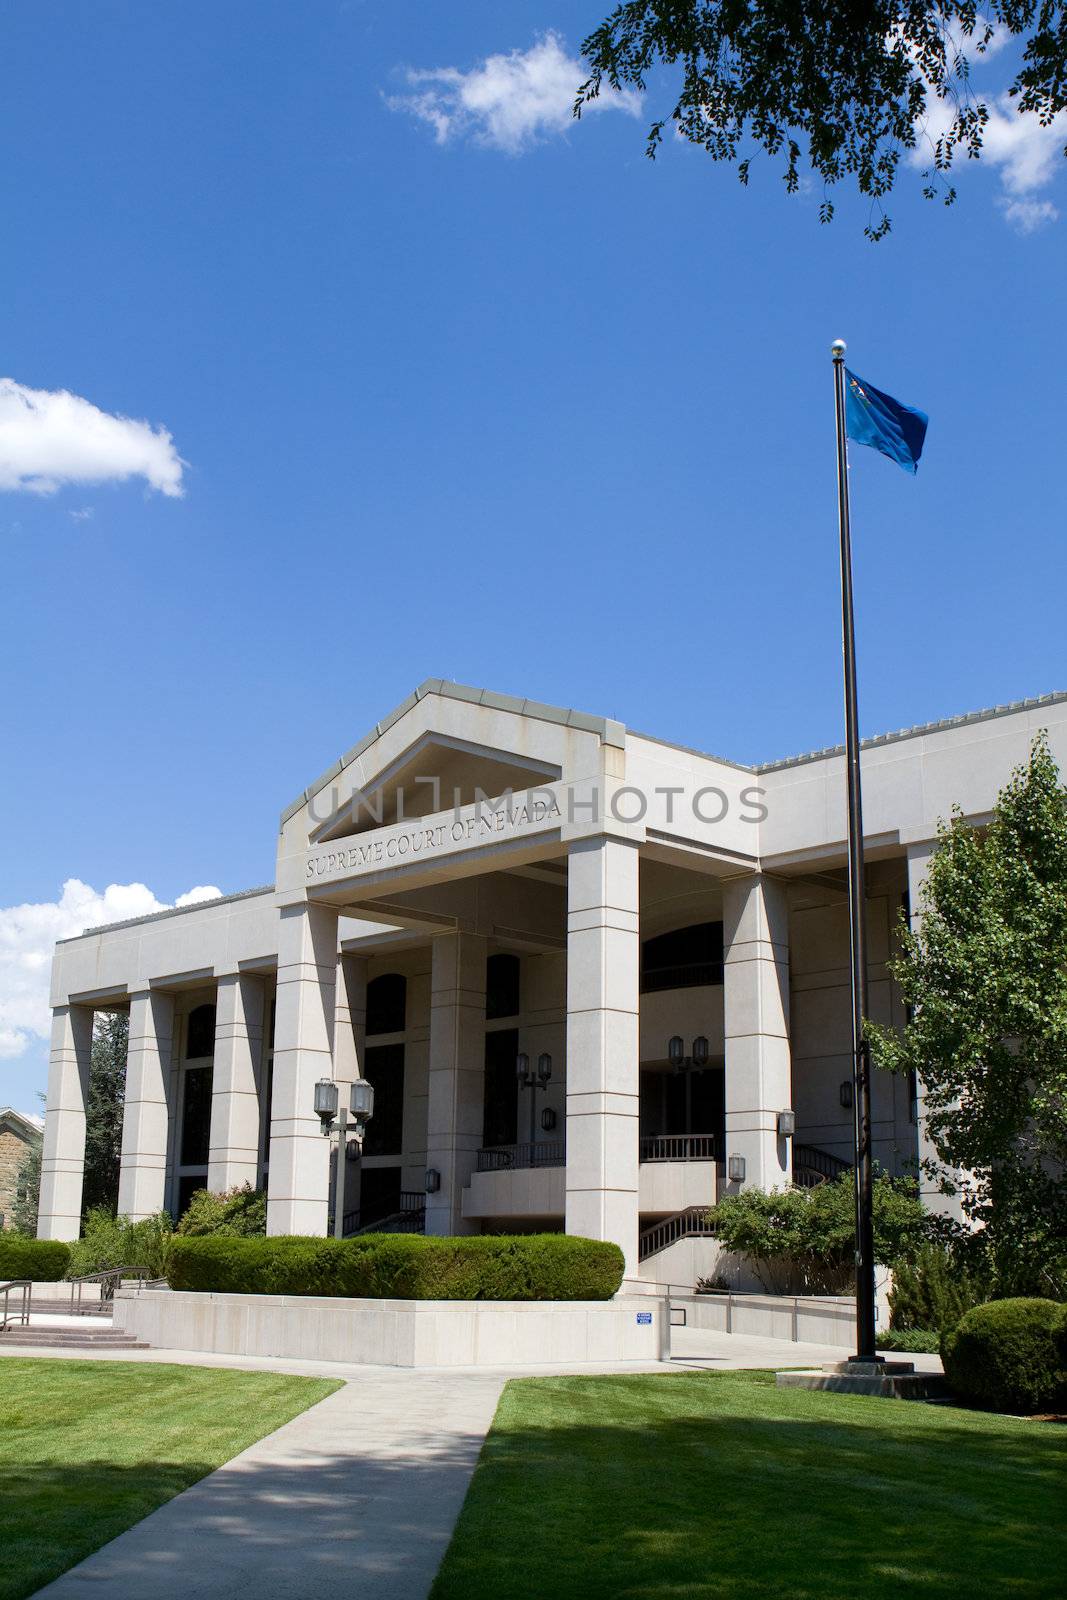 Supreme Court of Nevada building in Carson City, NV.